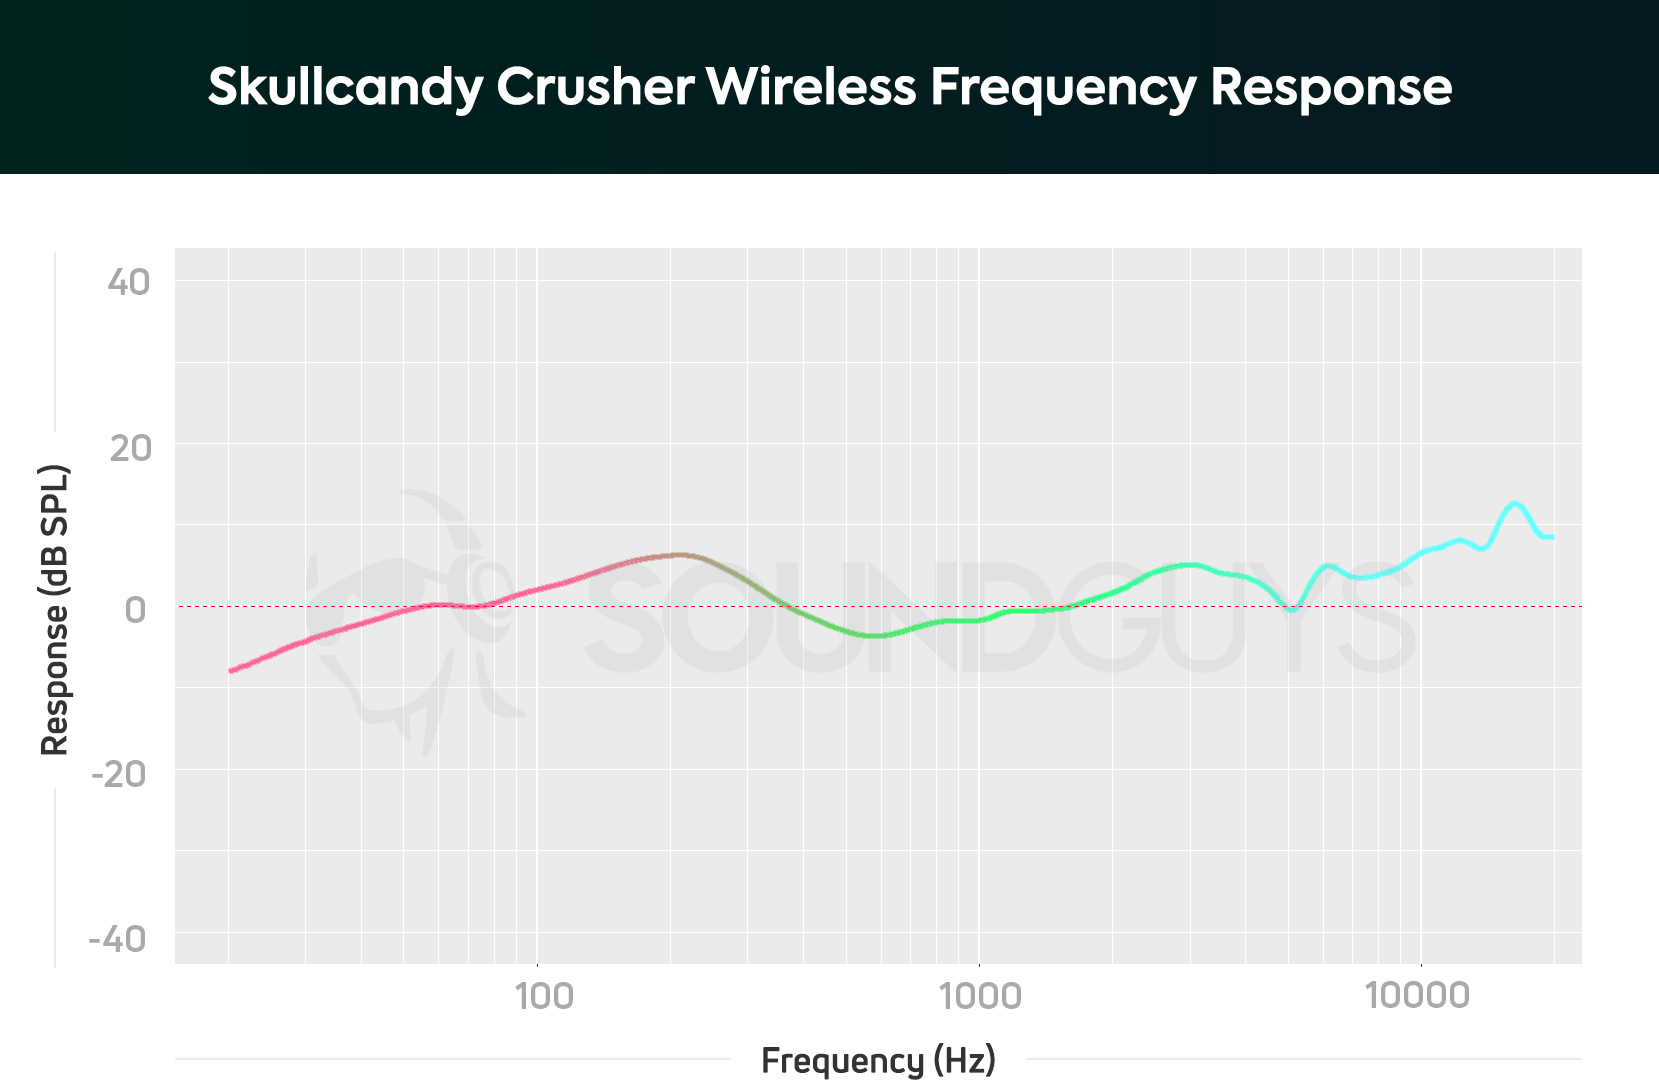 Frequency response of the Skullcandy Crusher Wireless